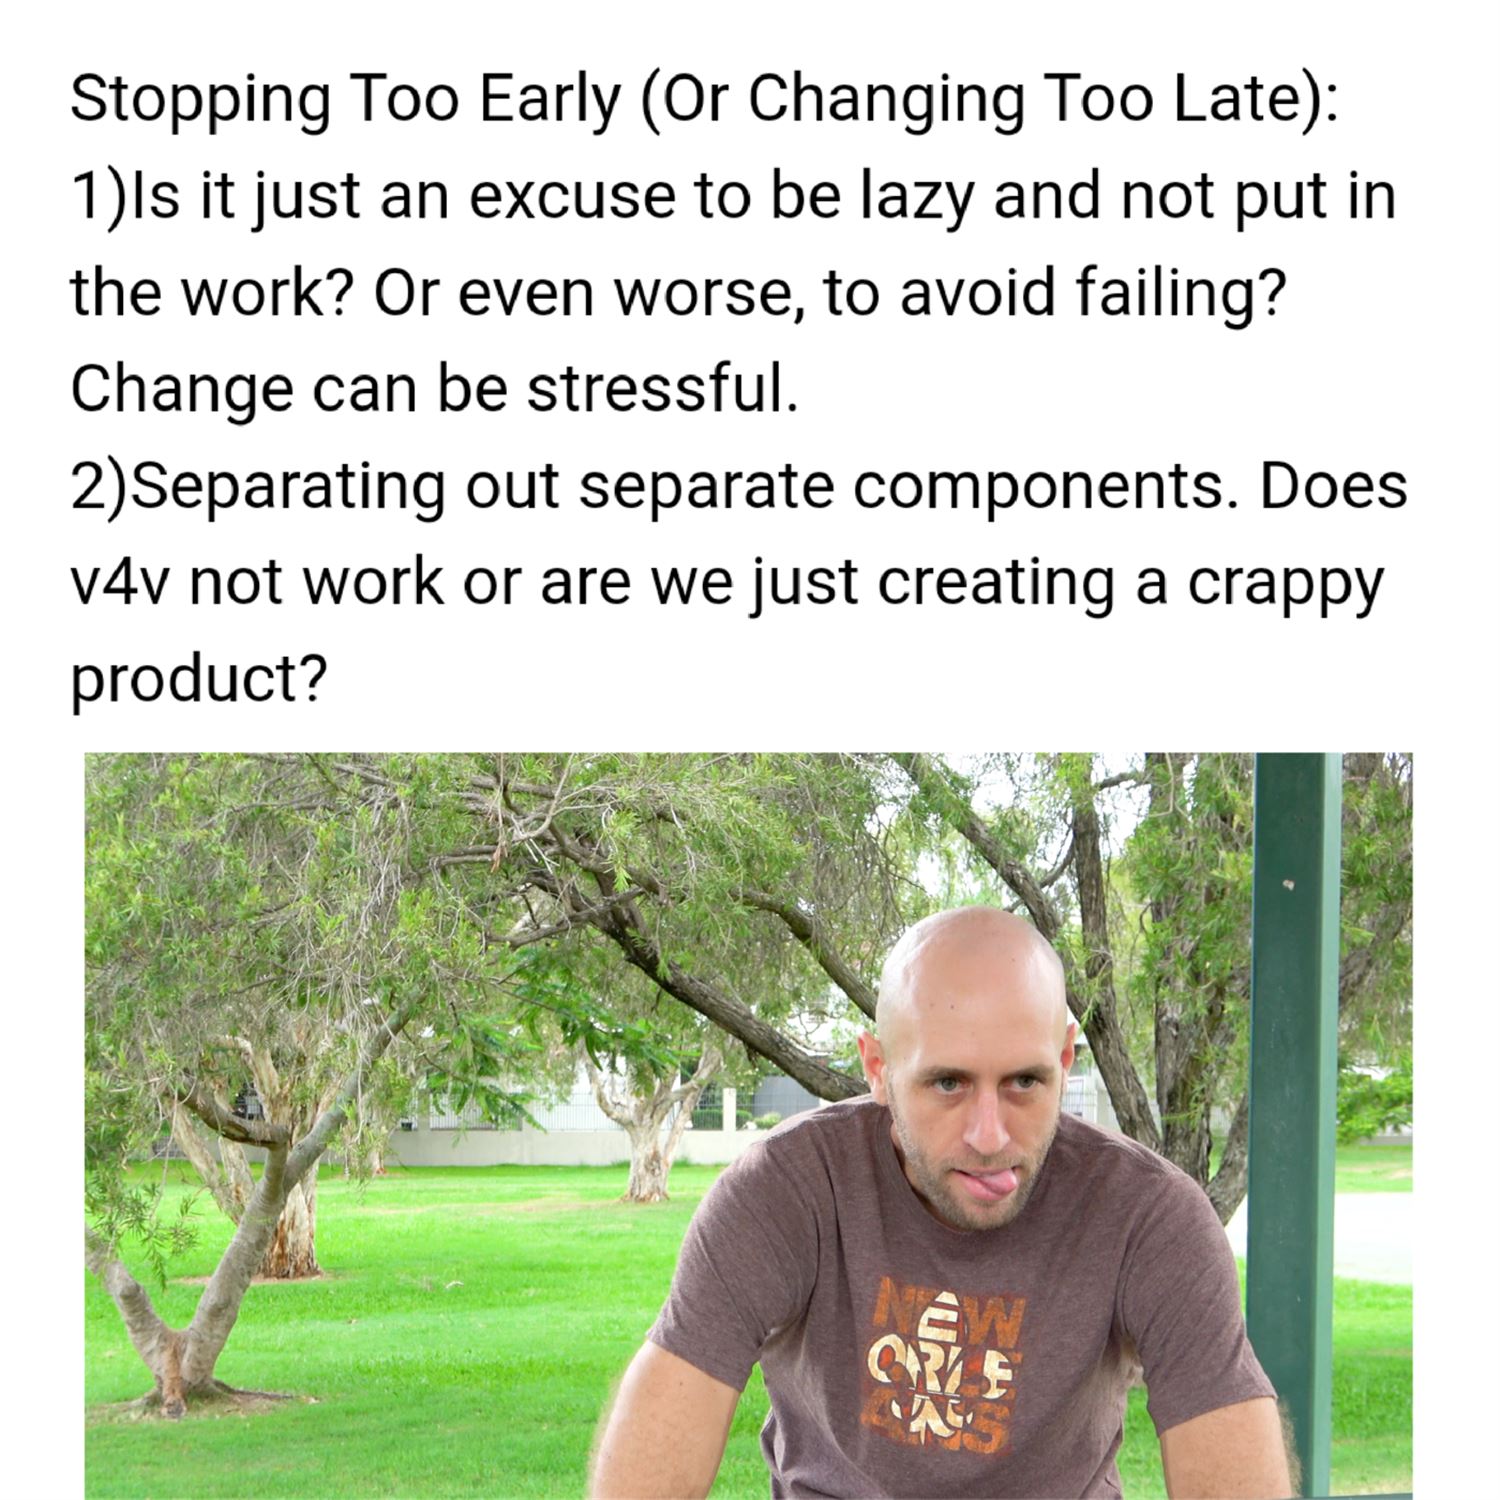 Stopping too early or changing too late